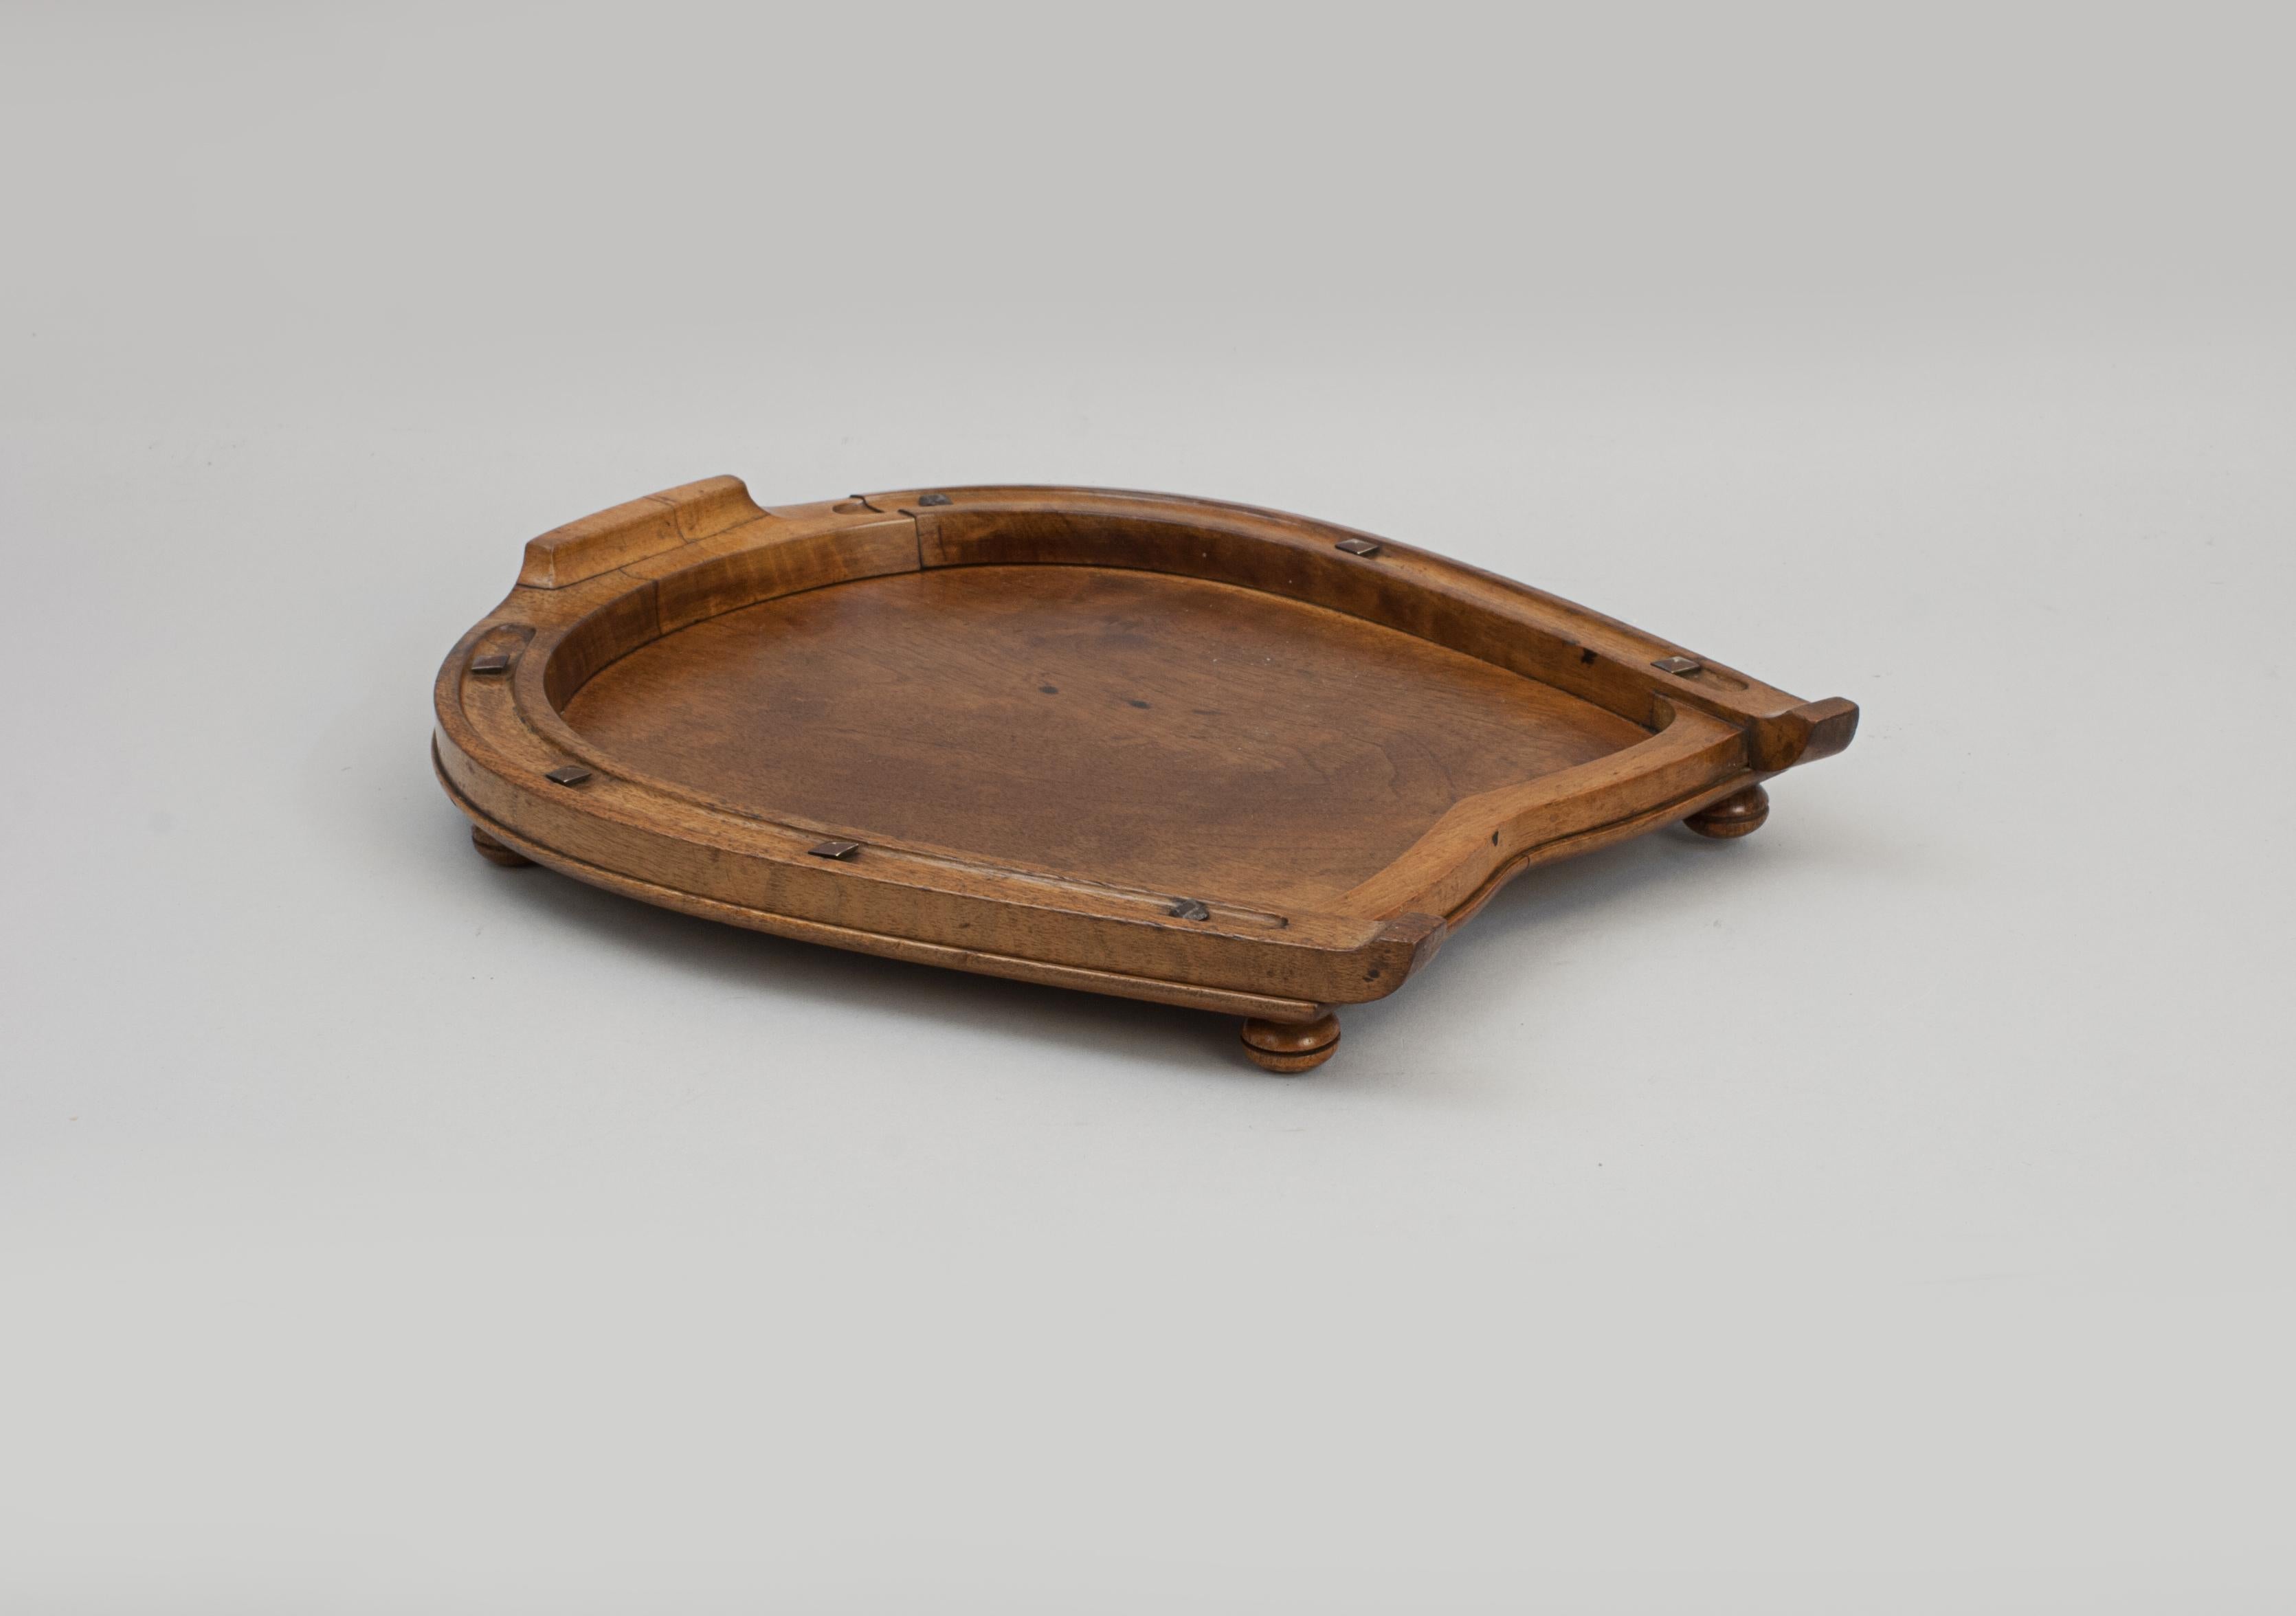 Edwardian Antique Equestrian Horseshoe Tray For Sale